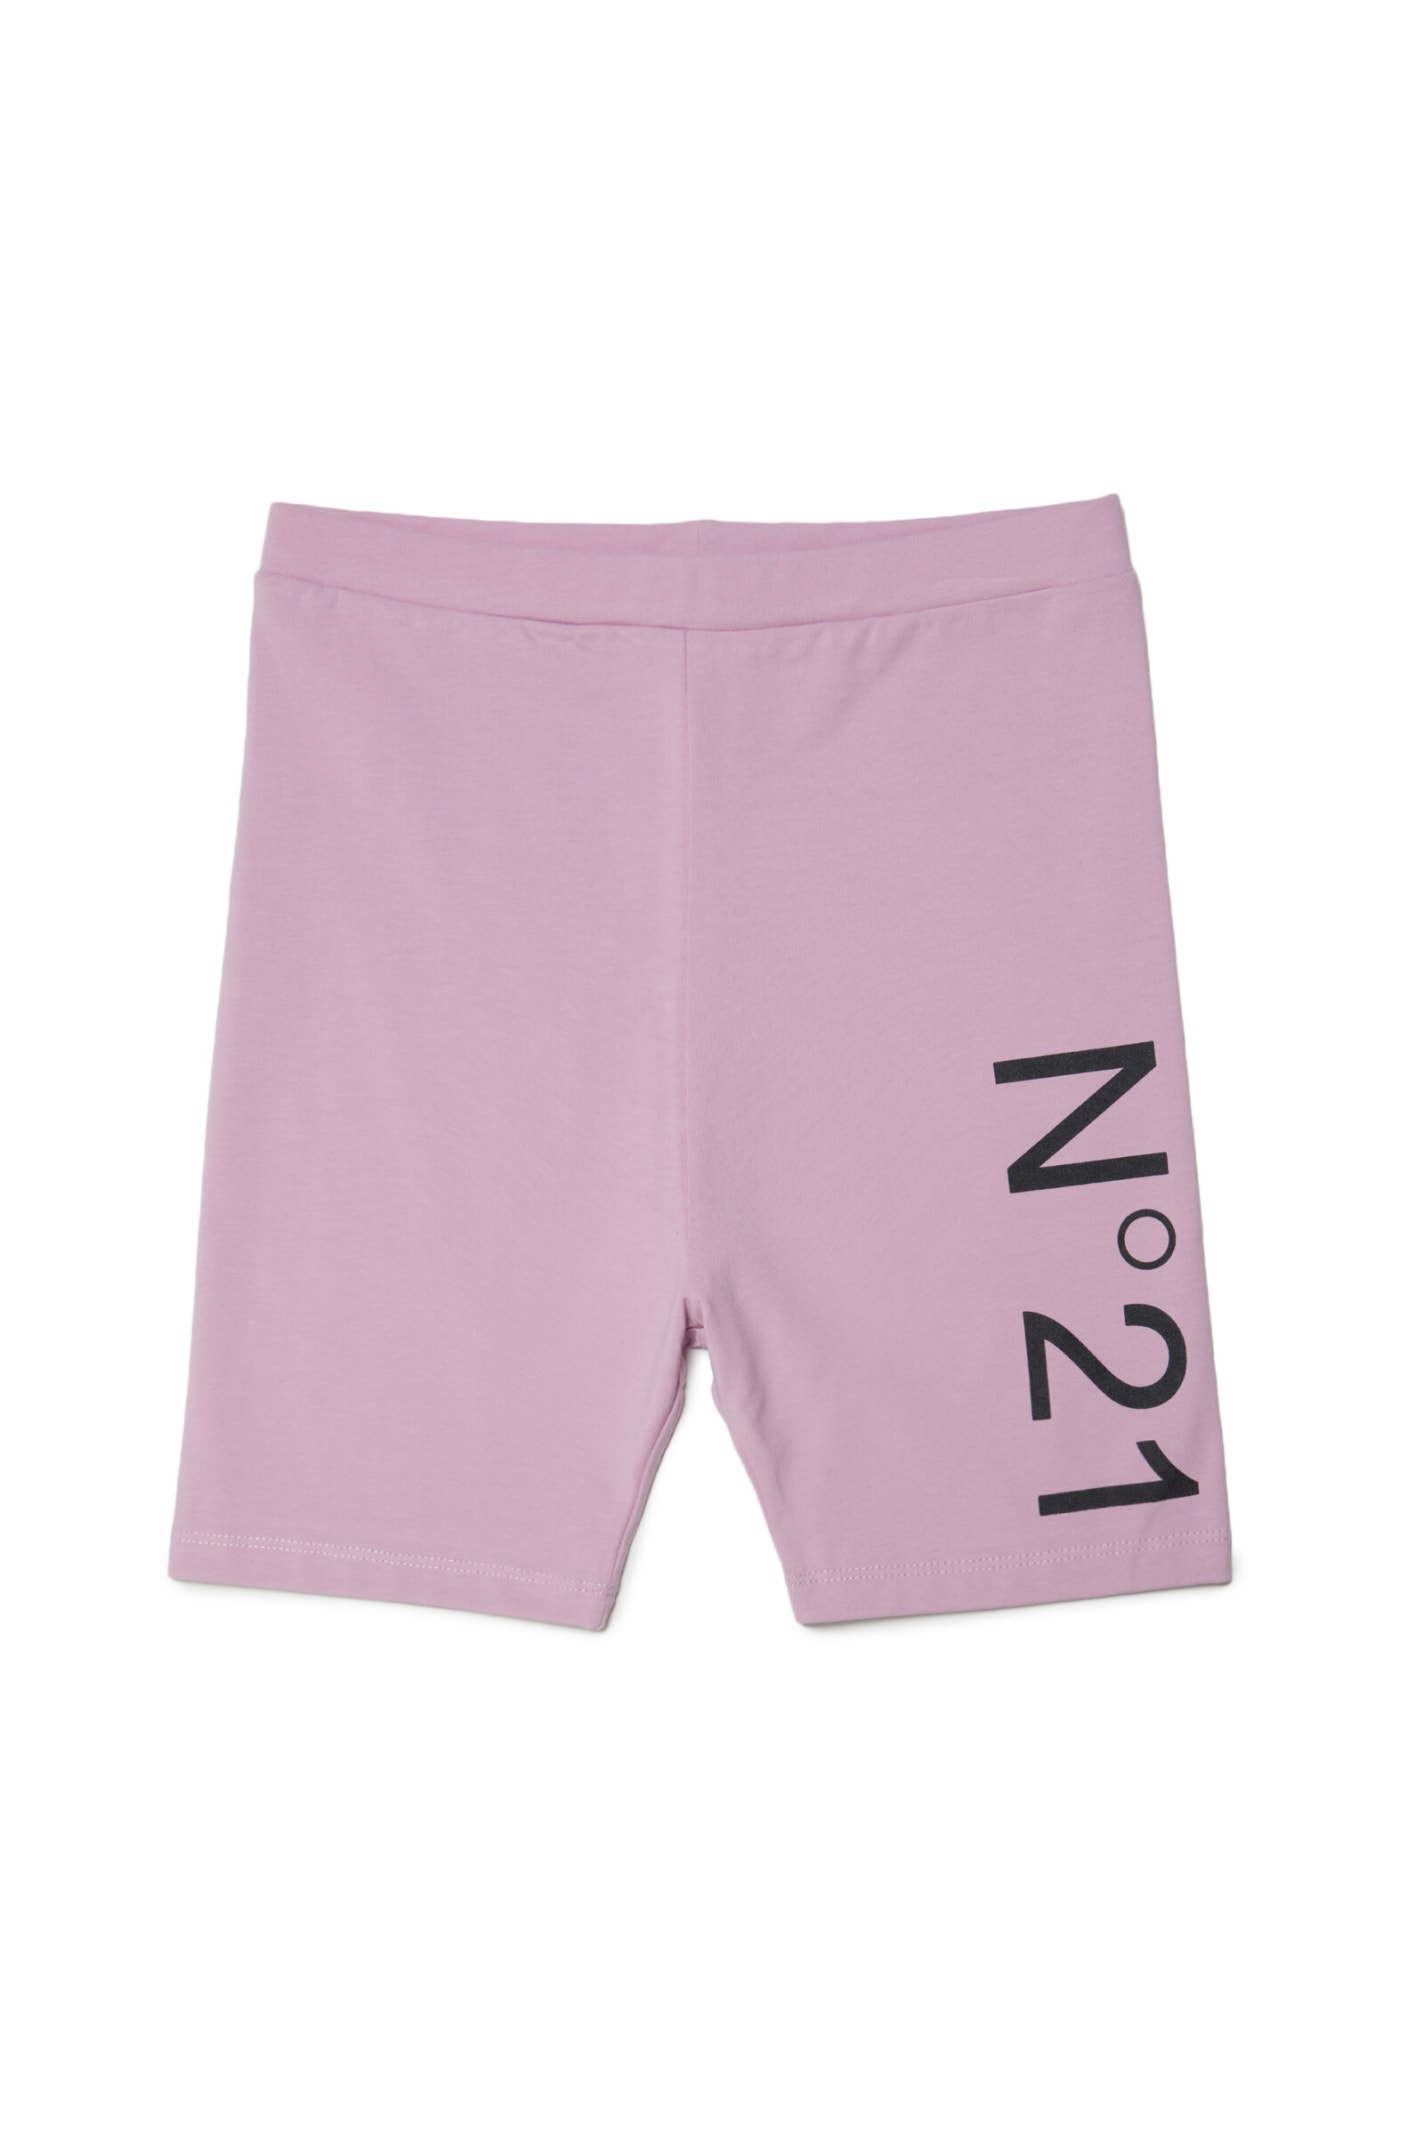 N°21 N21P129F SHORTS N°21 PINK STRETCH JERSEY SHORTS CYCLING MODEL WITH LOGO